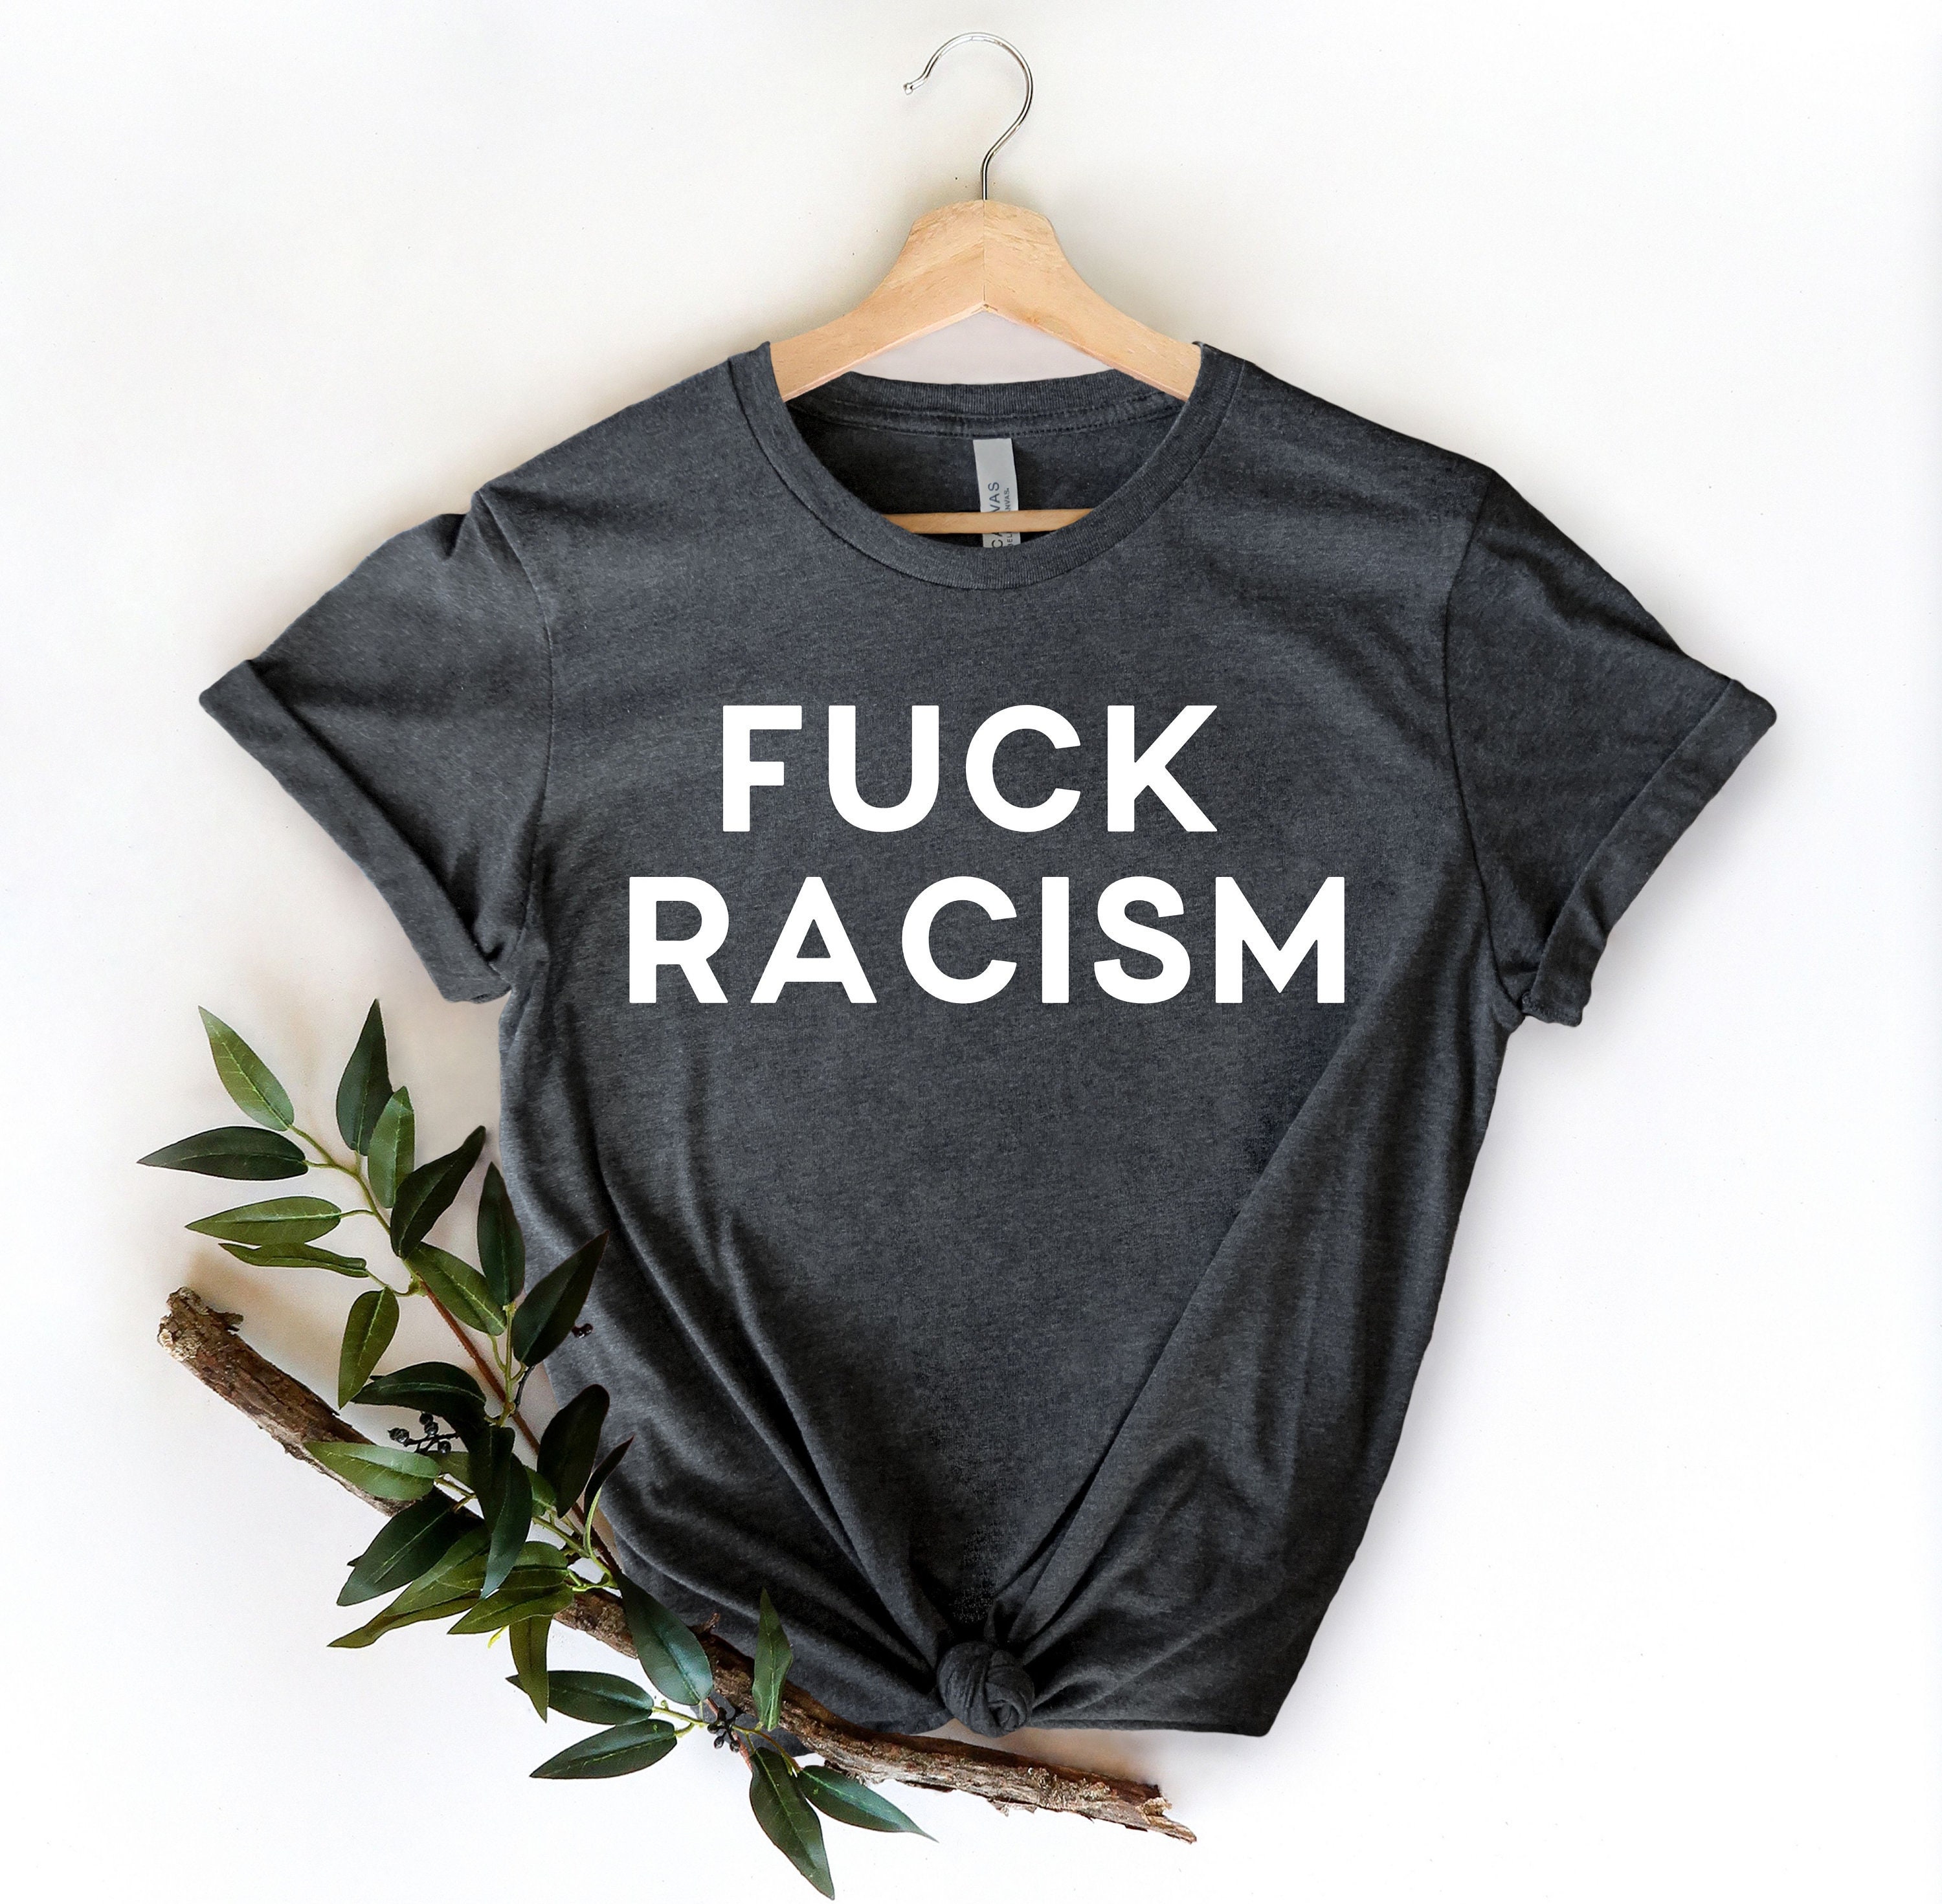 F*ck Racism Unisex Ringer T-Shirt by Compassionate Closet Small